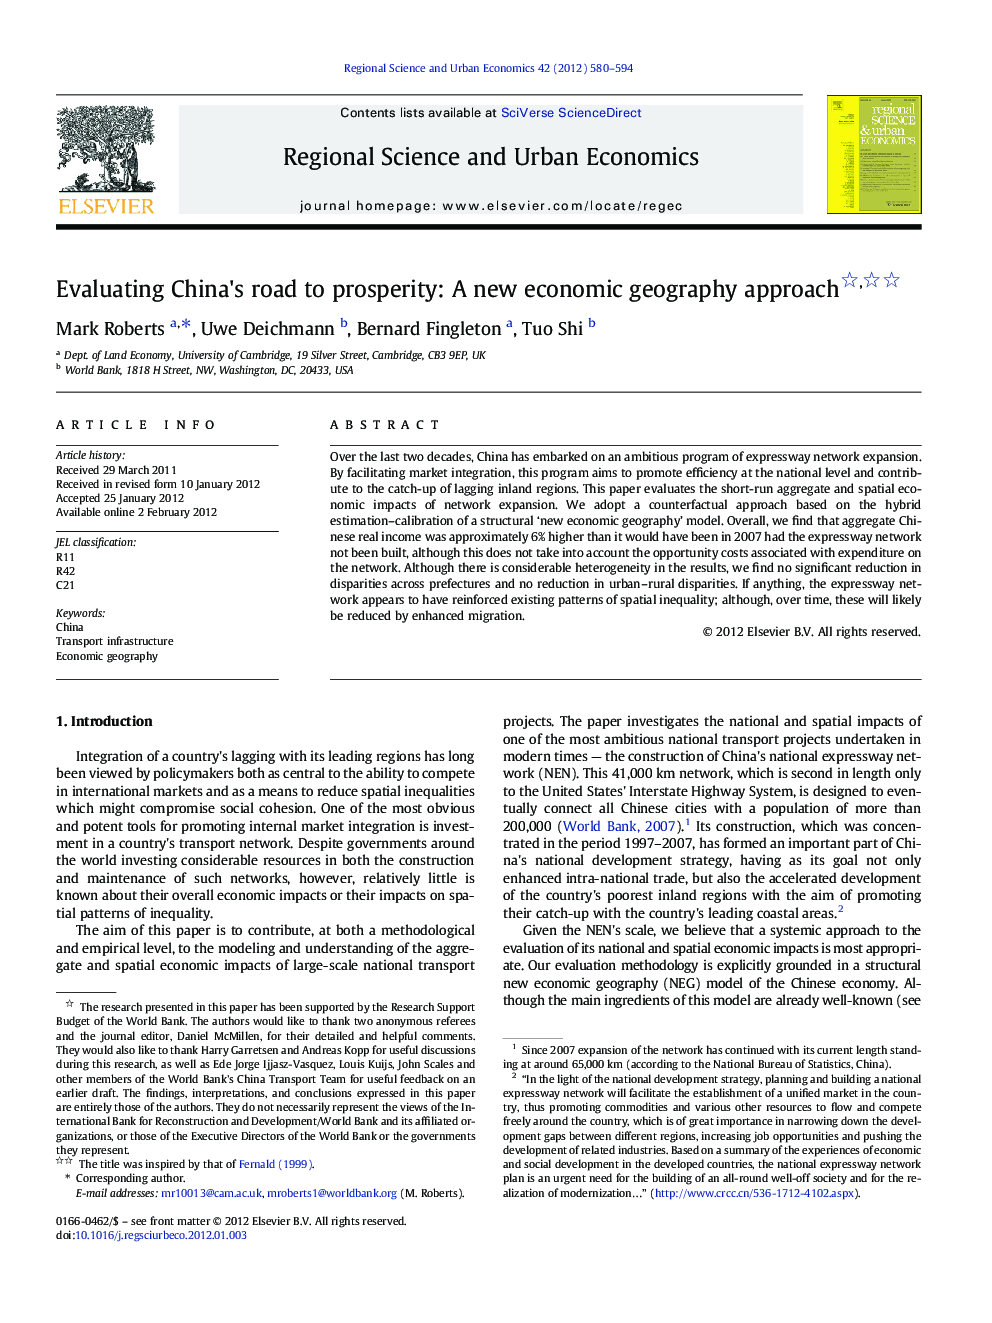 Evaluating China's road to prosperity: A new economic geography approach 